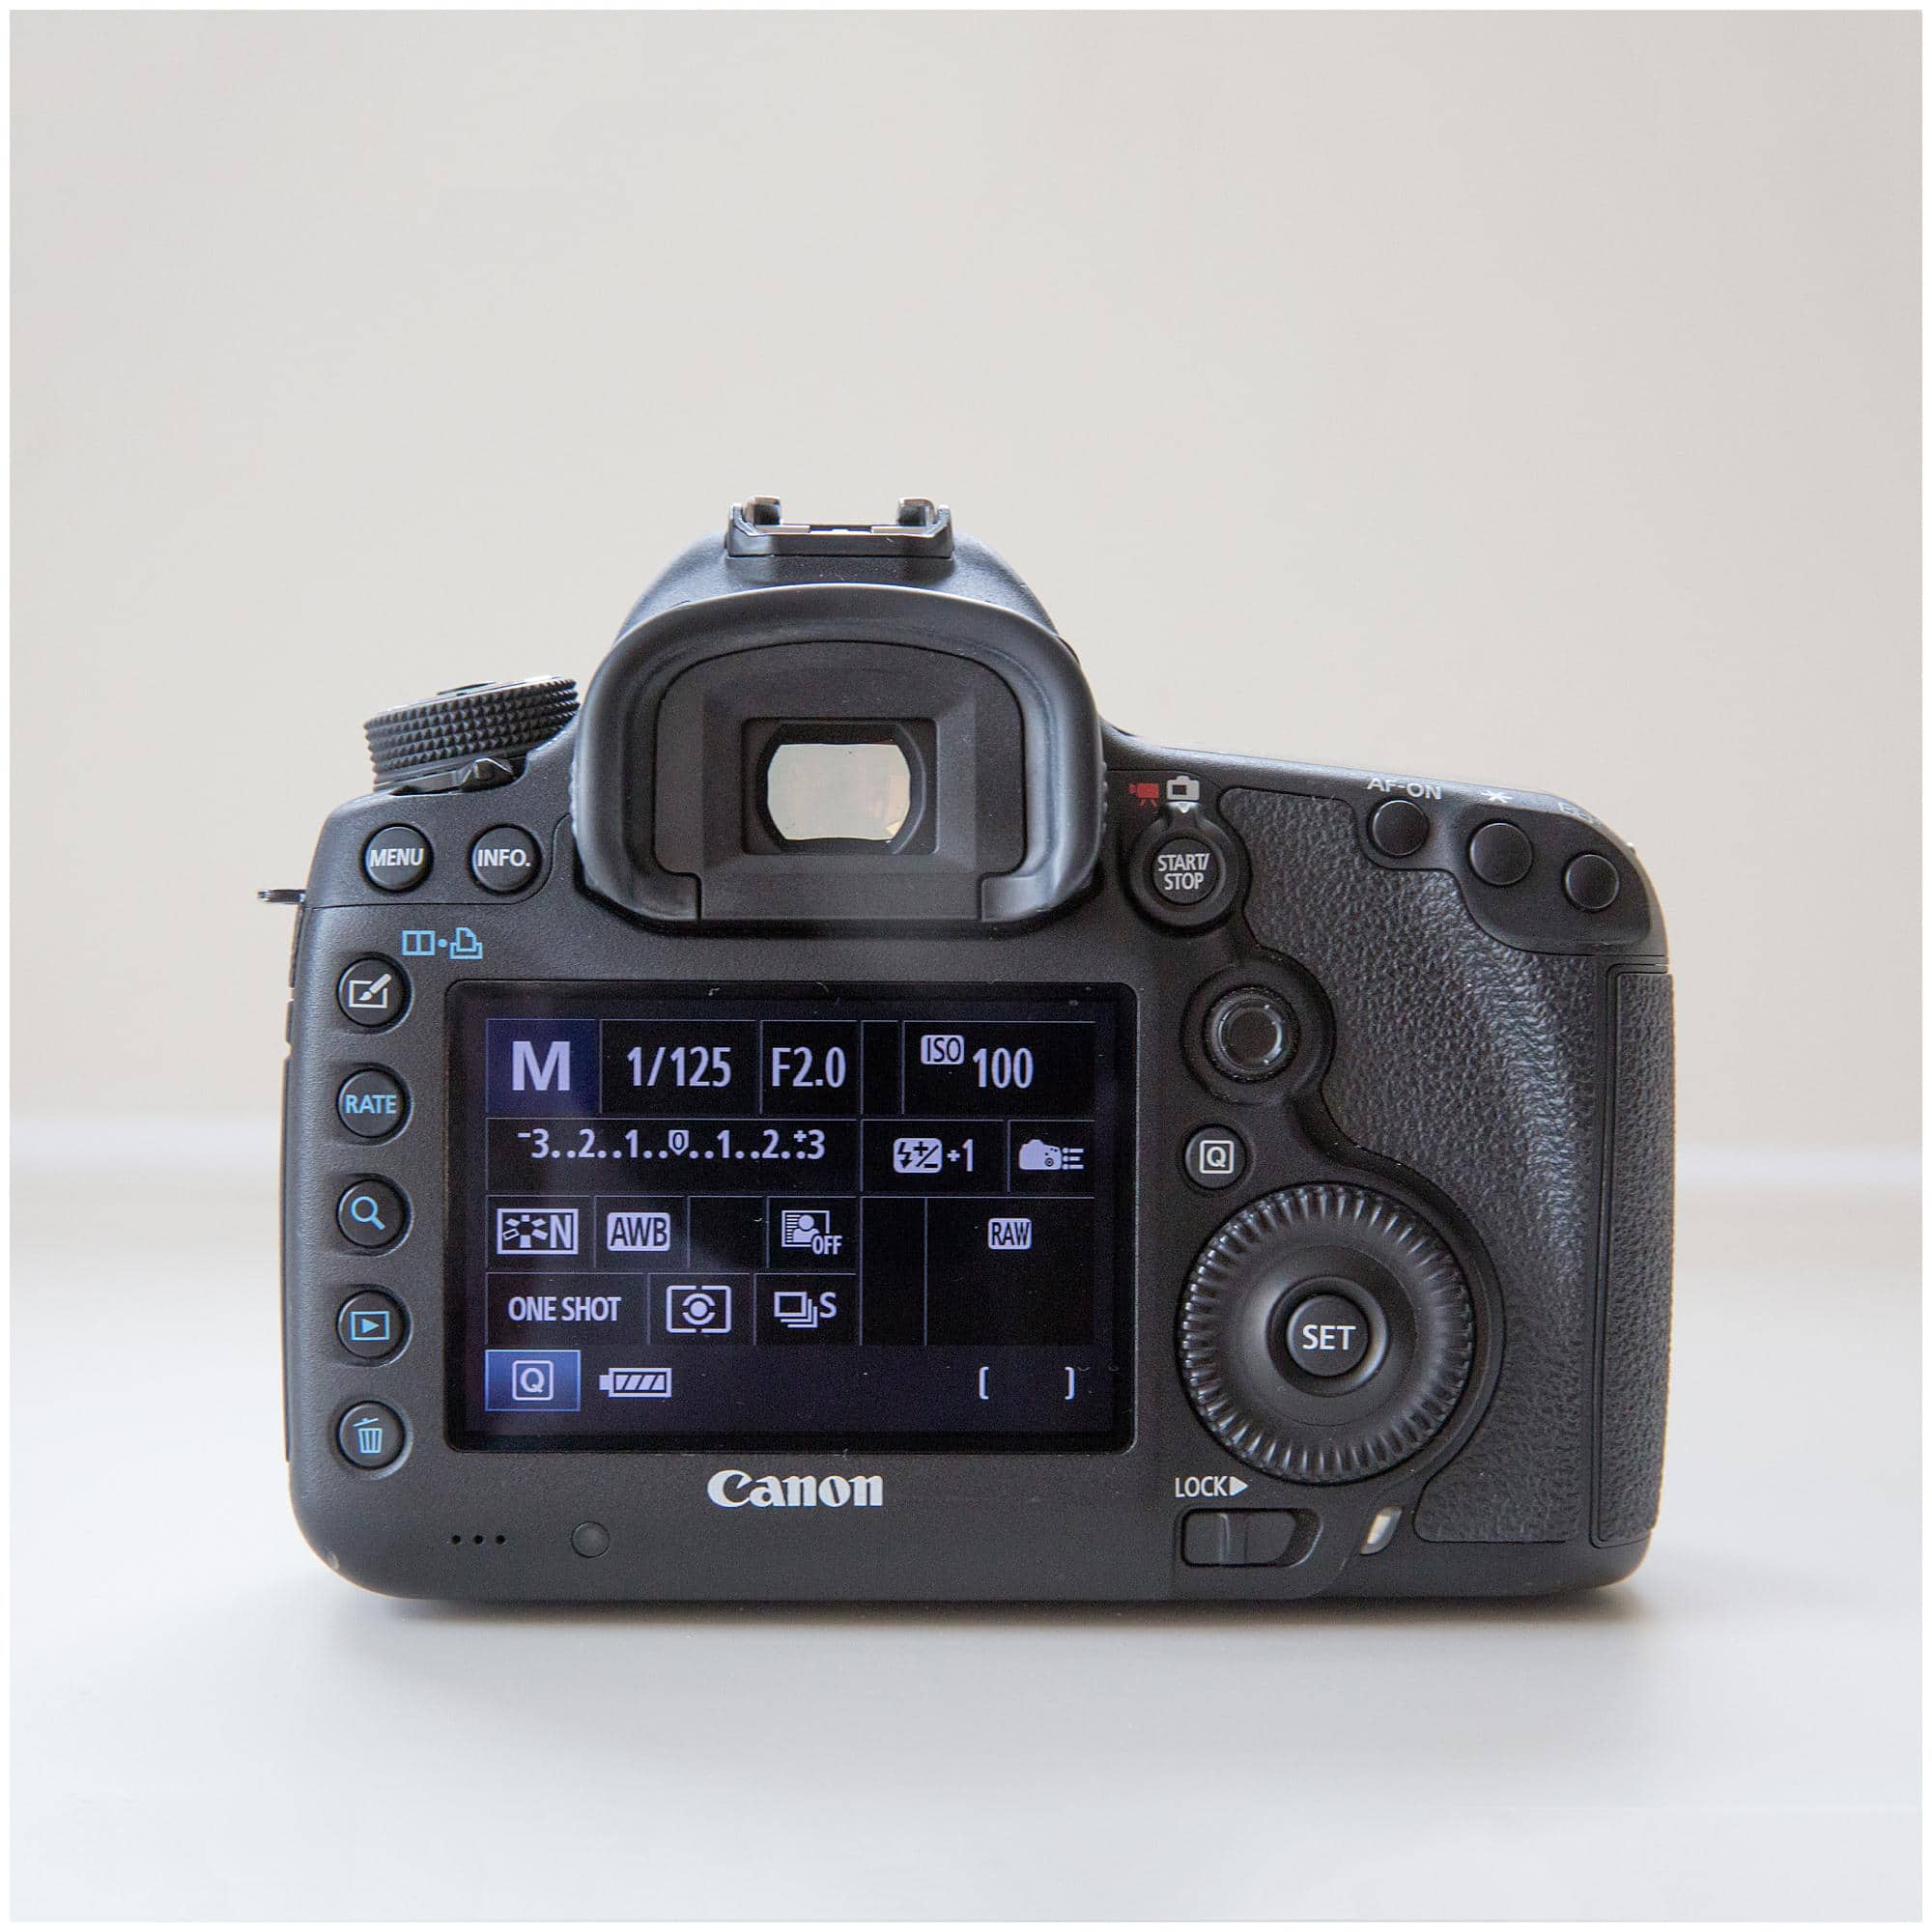 Canon 5D mark iii Camera on a white background